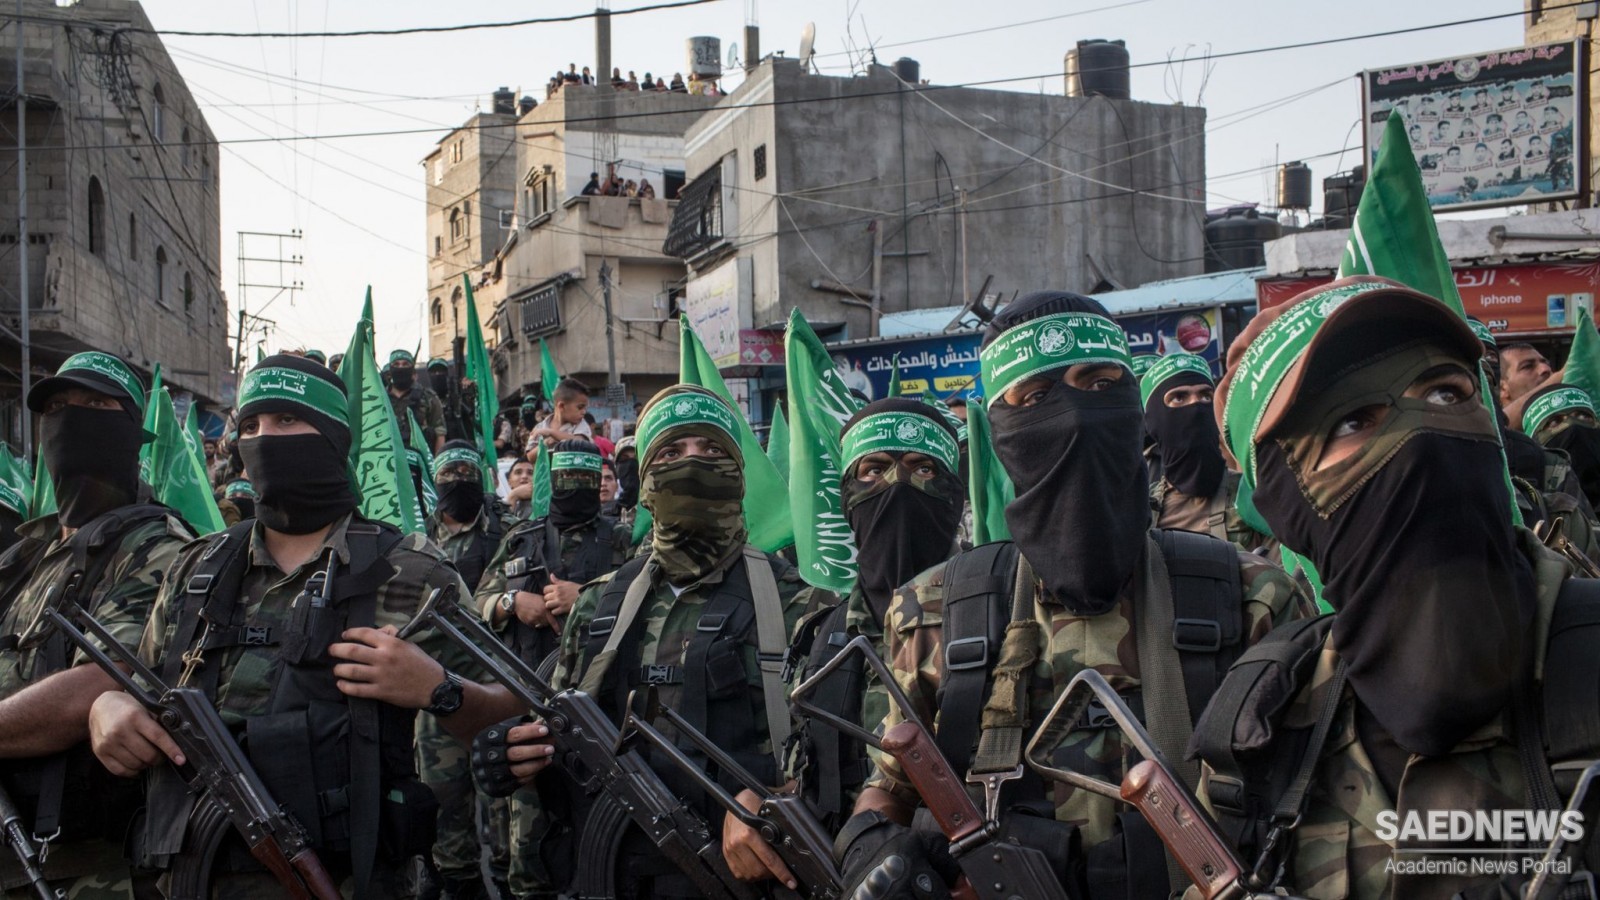 Would Hamas ever recognize Israel and conclude peace agreements with it?